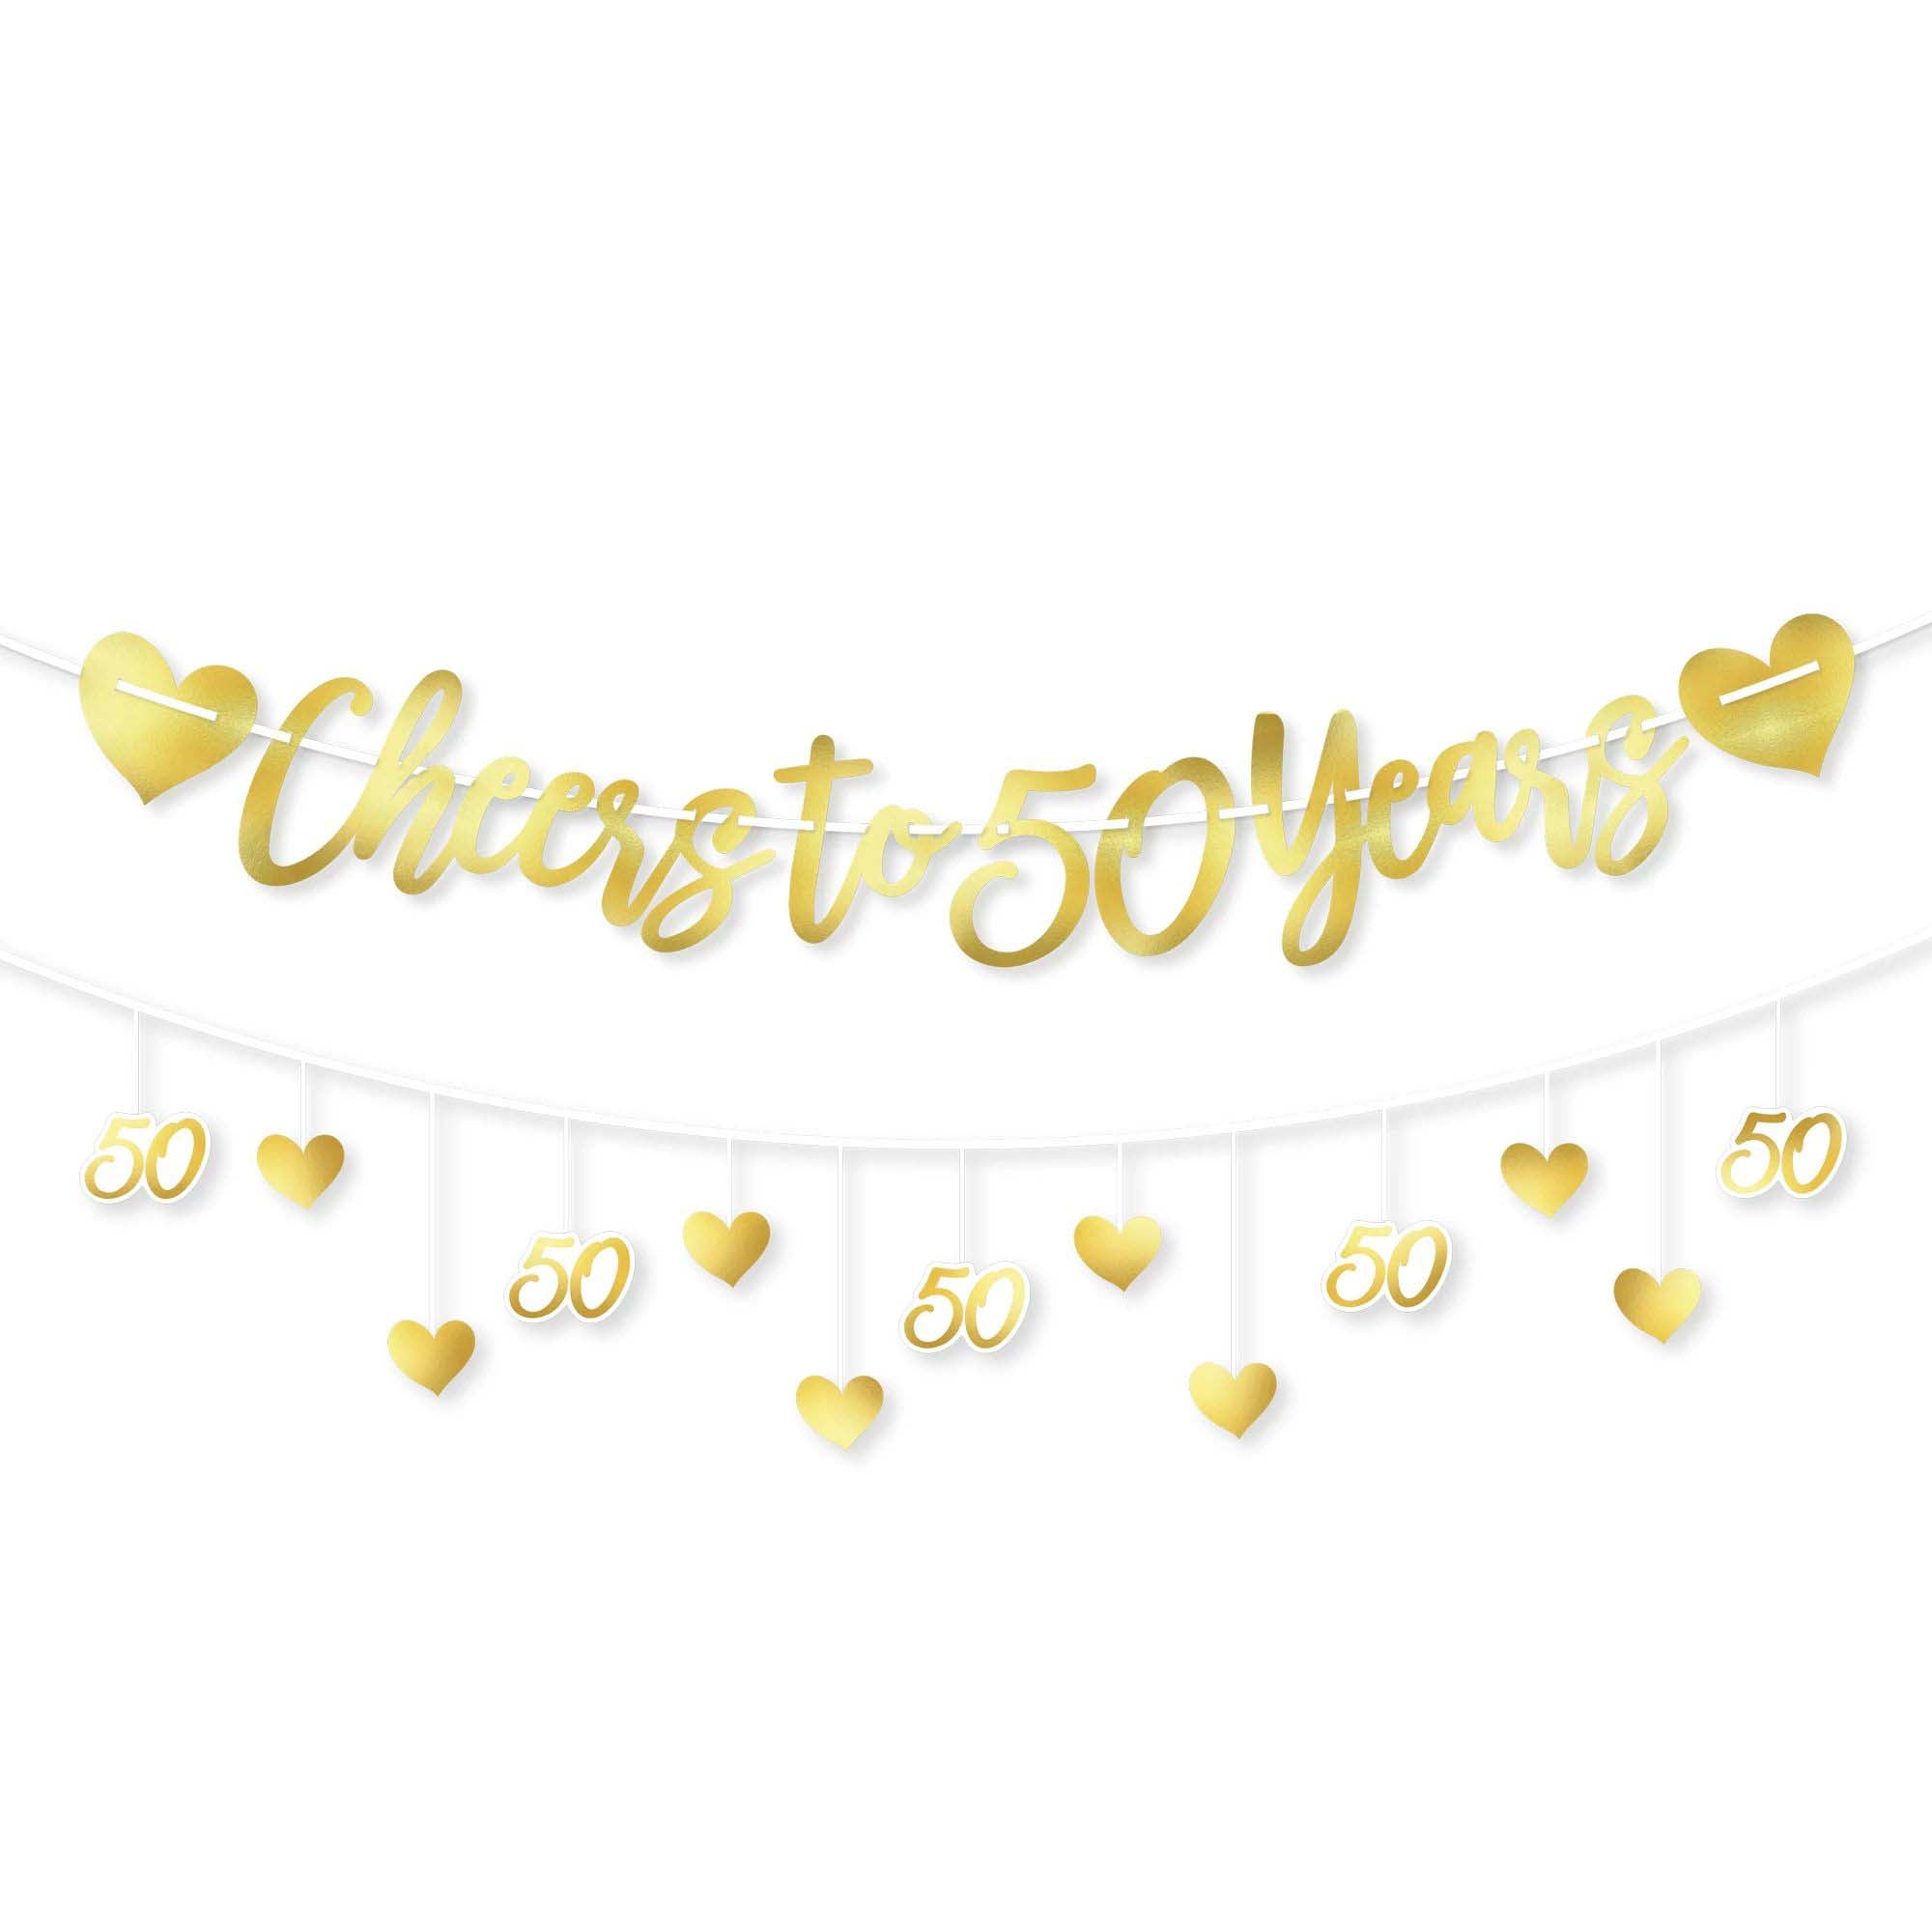 Happy 50th Anniversary Gold Paper Banner Kit, 12 Inches, 2 Count